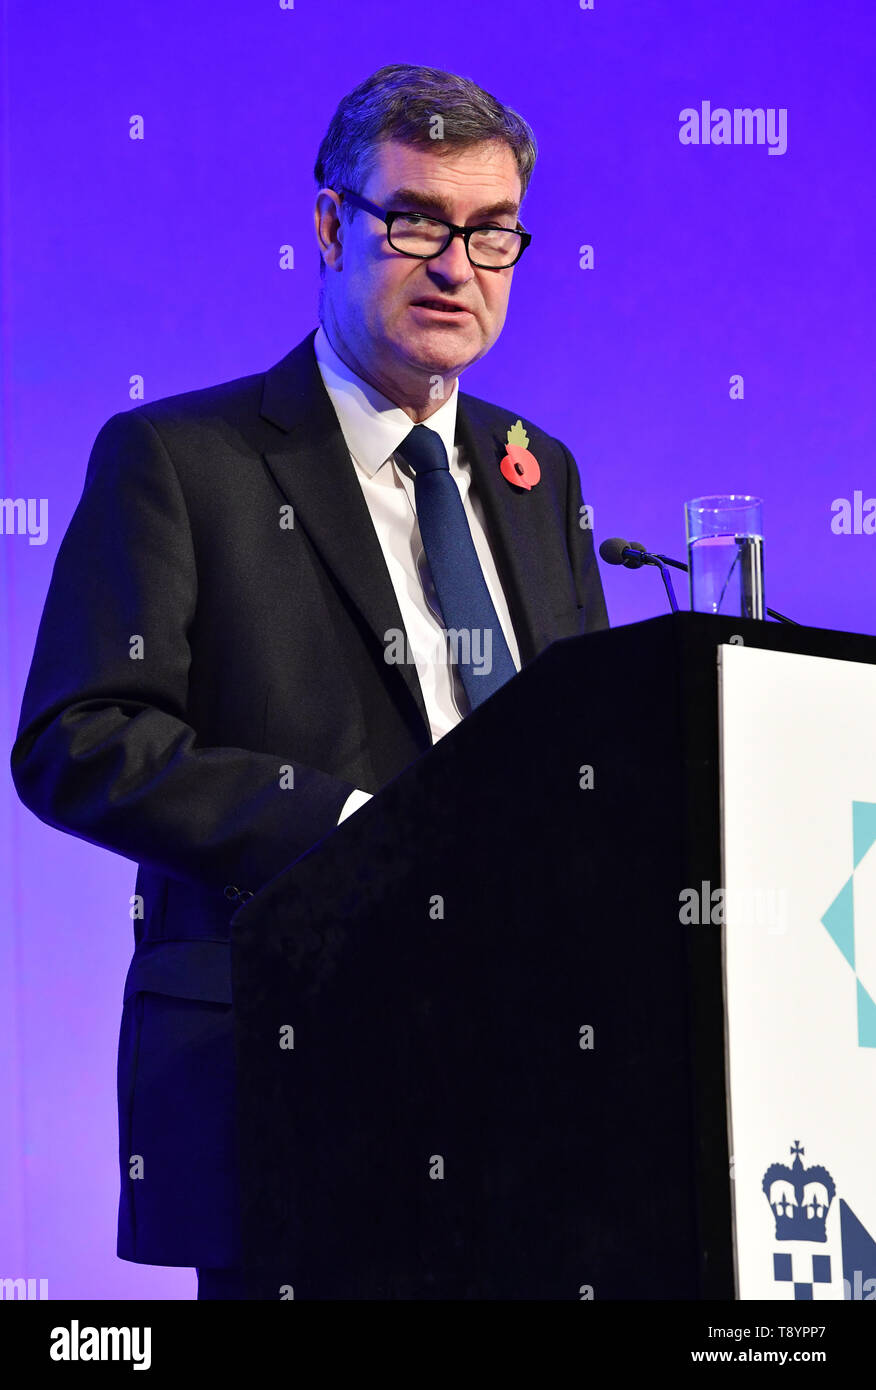 Secretary of State for Justice and Lord Chancellor David Gauke speaking to senior police officers at the APCC ( Association of Police & Crime Commissioners)and NPCC ( National Police Chiefs Council) Partnership Summit 2018 in London. 1 November 2018. Stock Photo